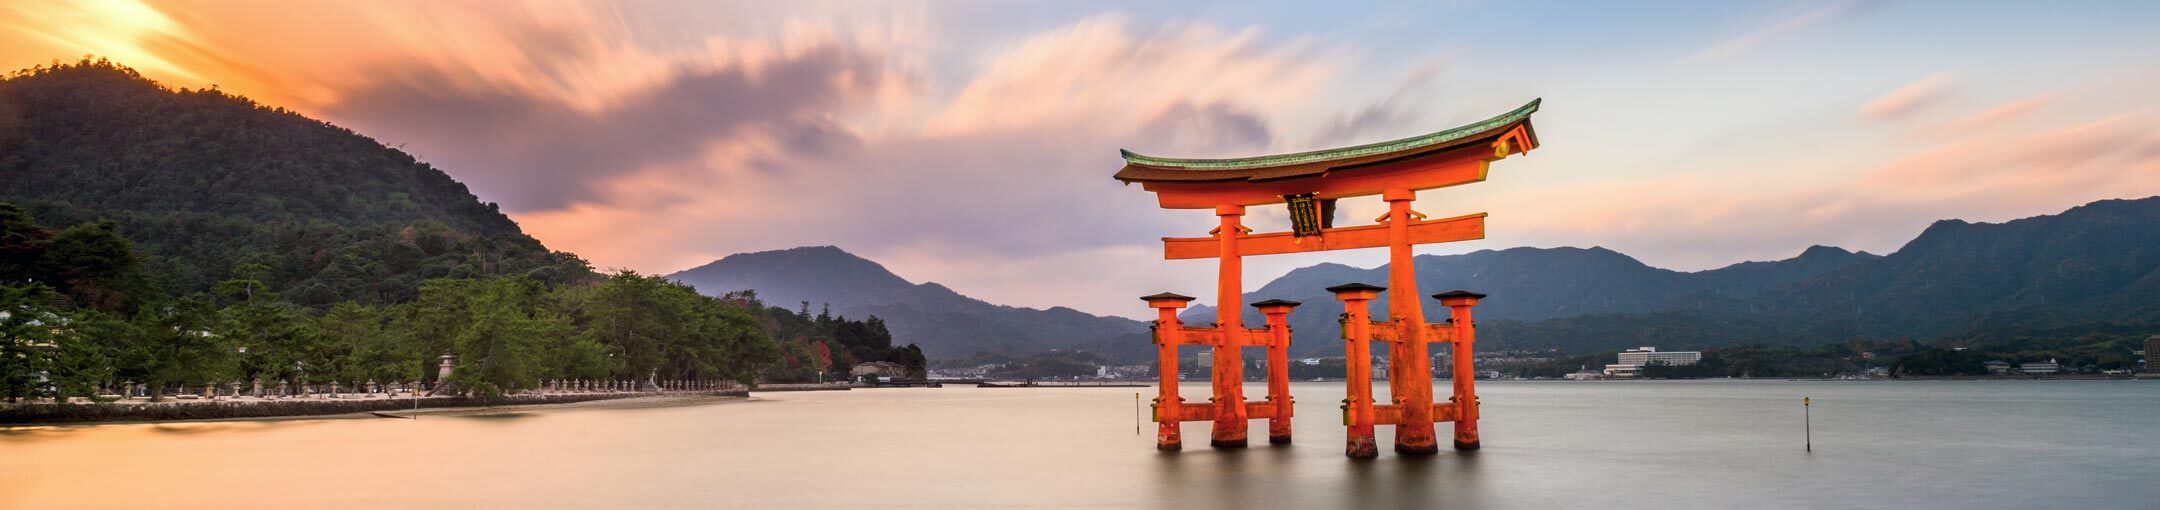 A Japanese 'torii' gateway sits in the water with mountains in the background.